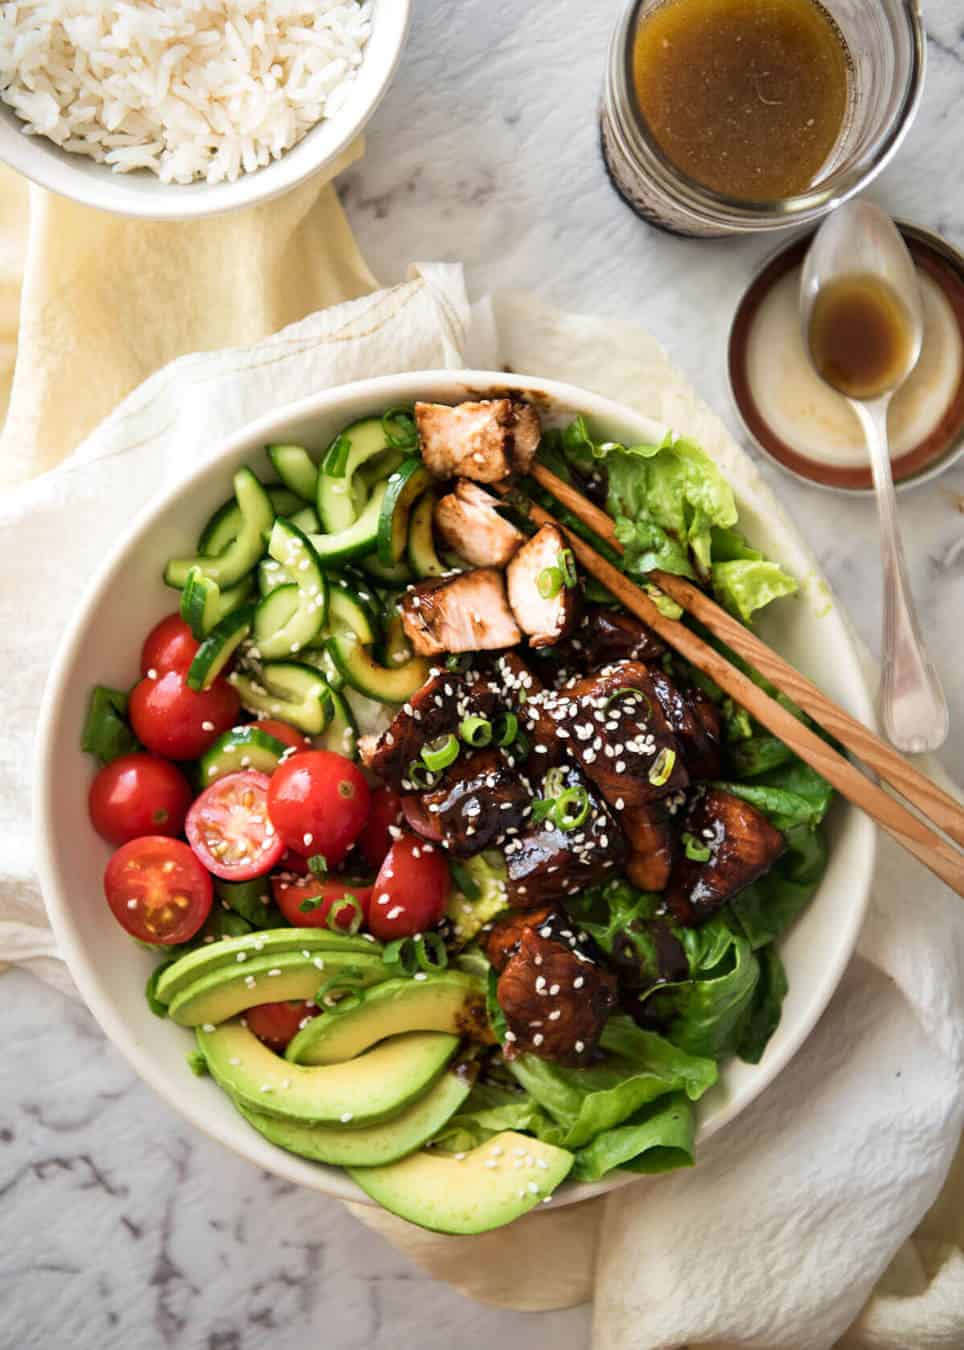 Asian Salmon Salad - Salmon dripping in a gorgeous Asian glaze on a fresh, vibrant salad drizzled with sesame dressing. Quick to make, packed with serious flavour! www.recipetineats.com